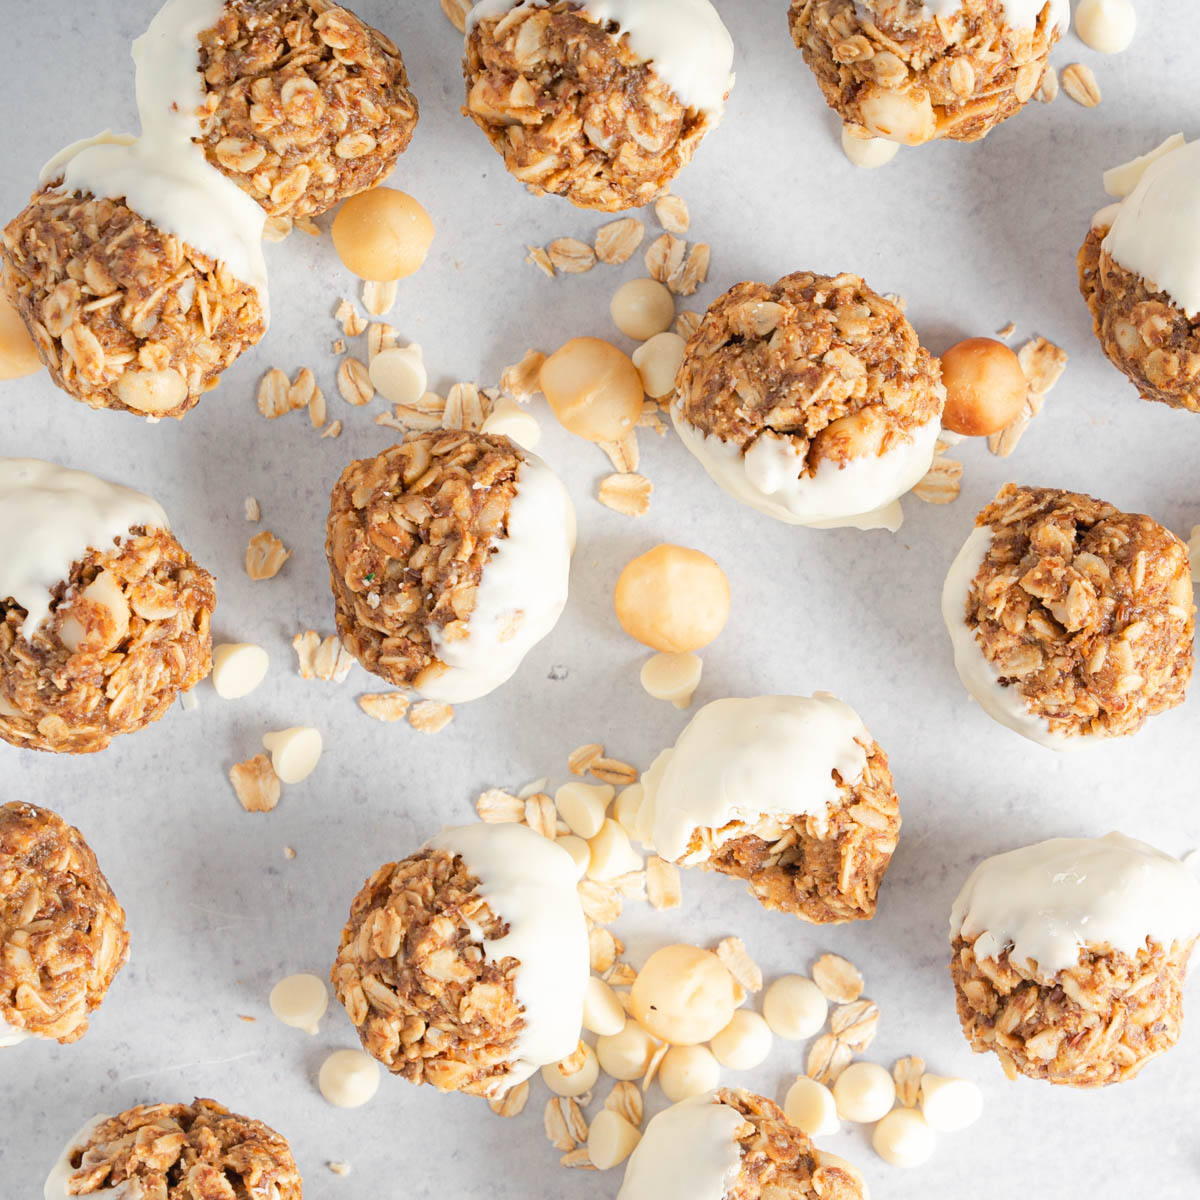 Top down of many white chocolate macadamia nut bites. Noted macadamia nut and oat bites scattered over off white background.